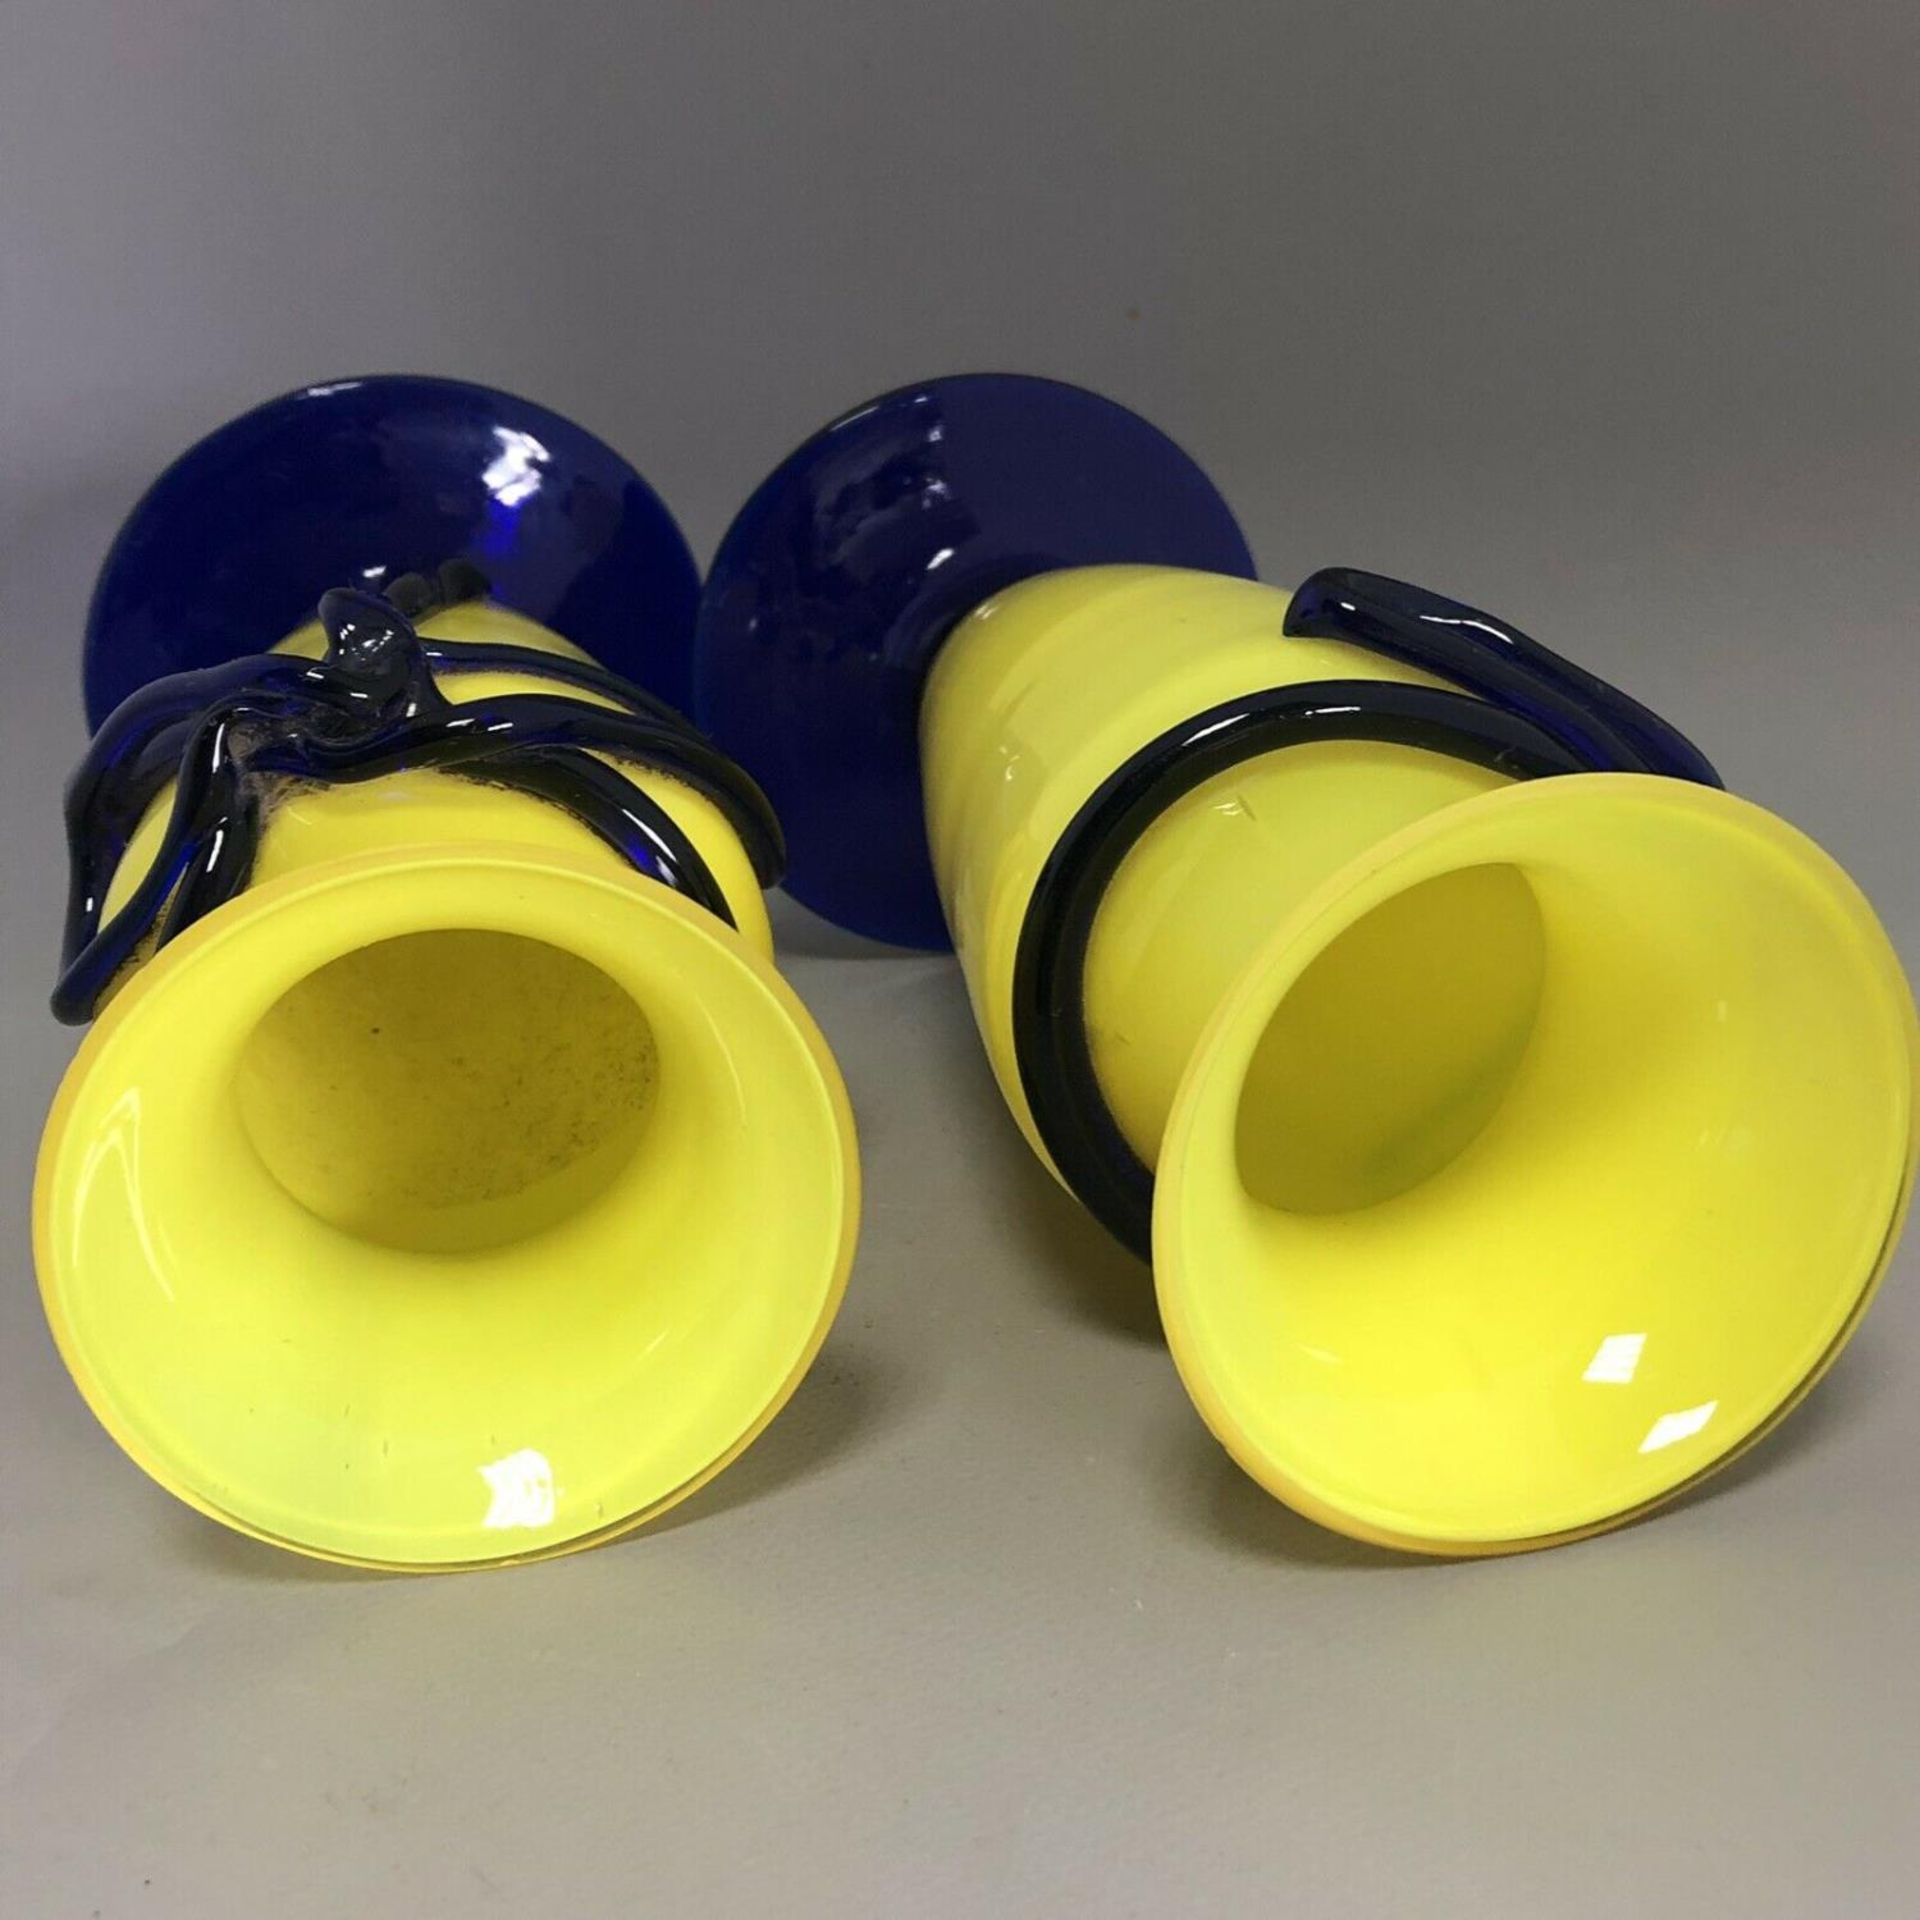 A pair of vintage bright yellow art blown glass vases with blue glass ribbon bows - Image 6 of 6